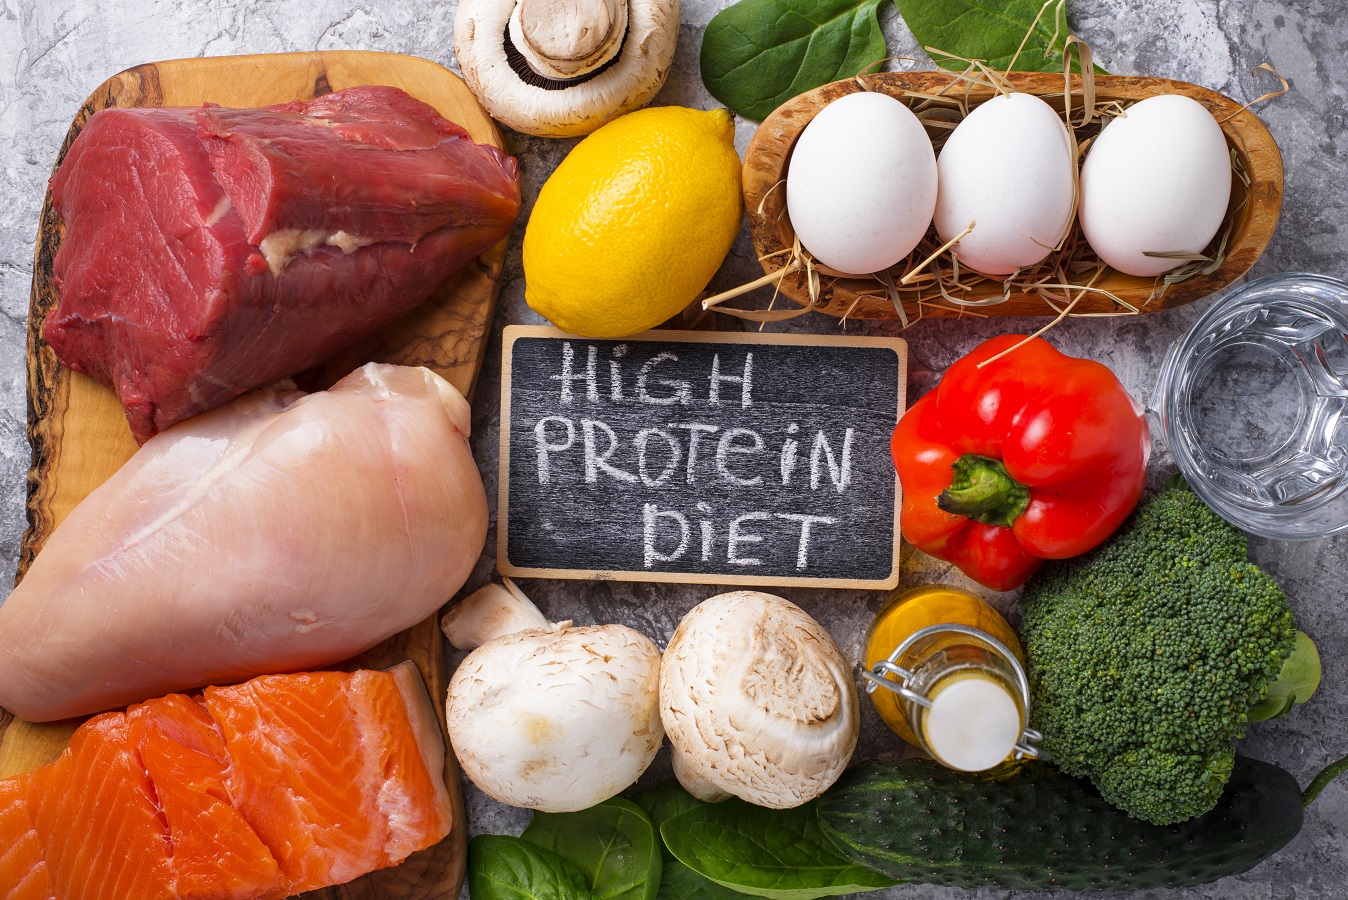 Does a high protein diet affect kidneys?